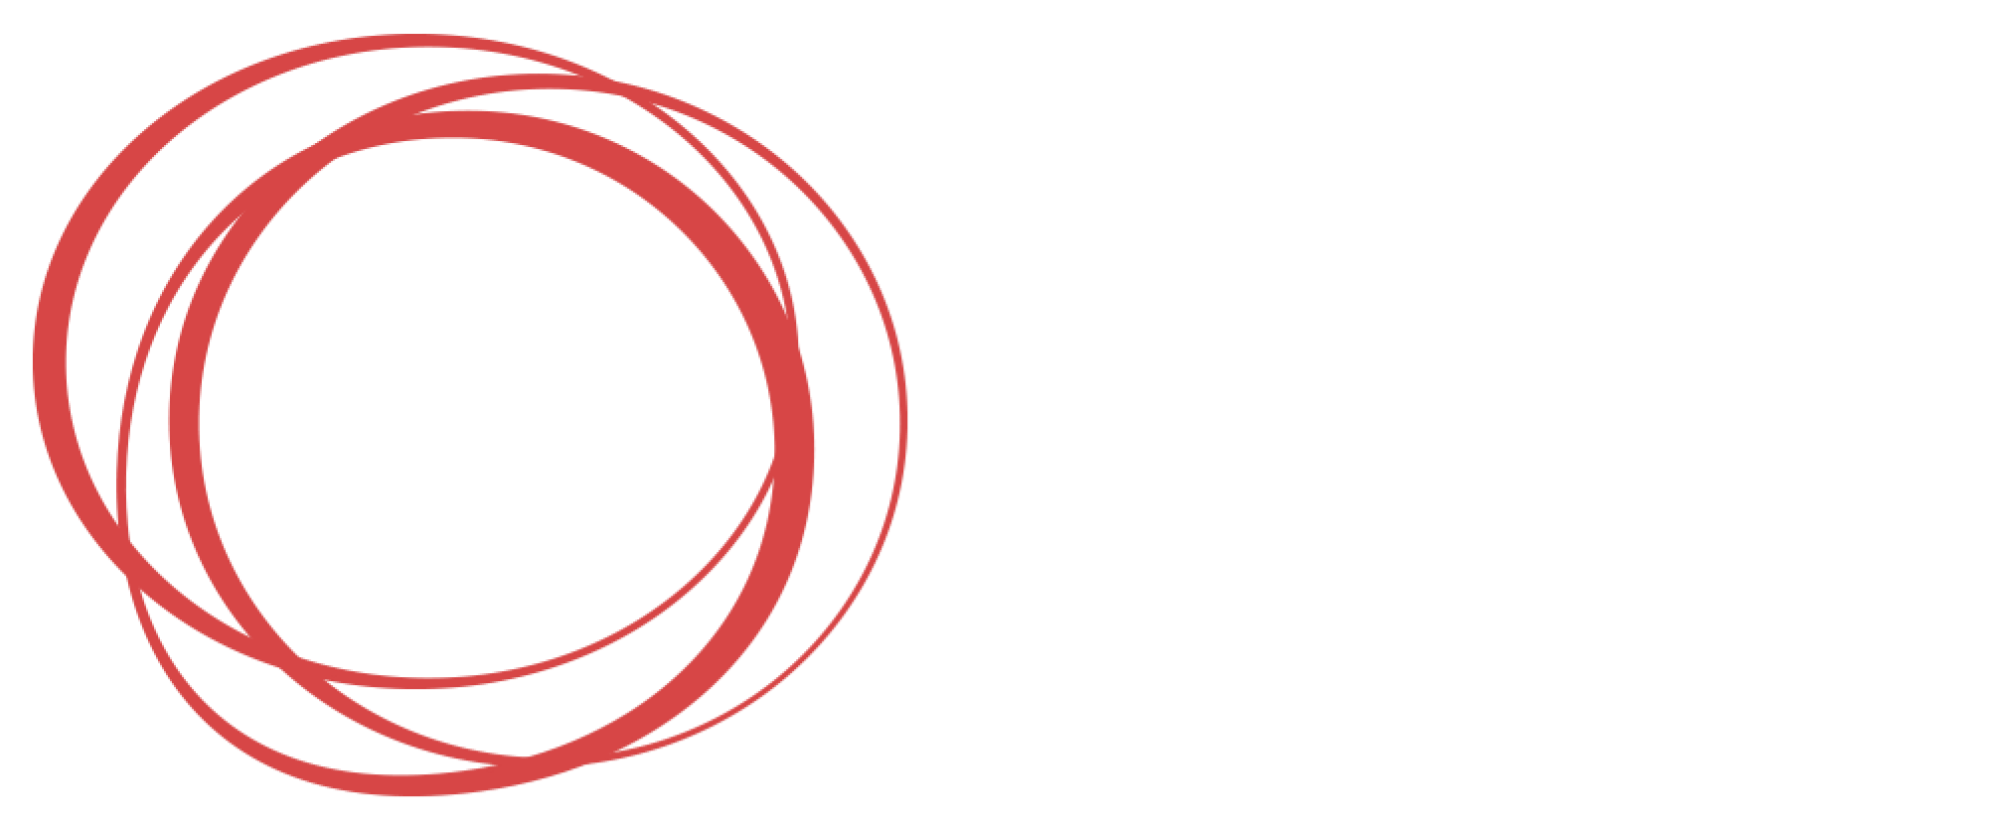 Institute of Presilience®